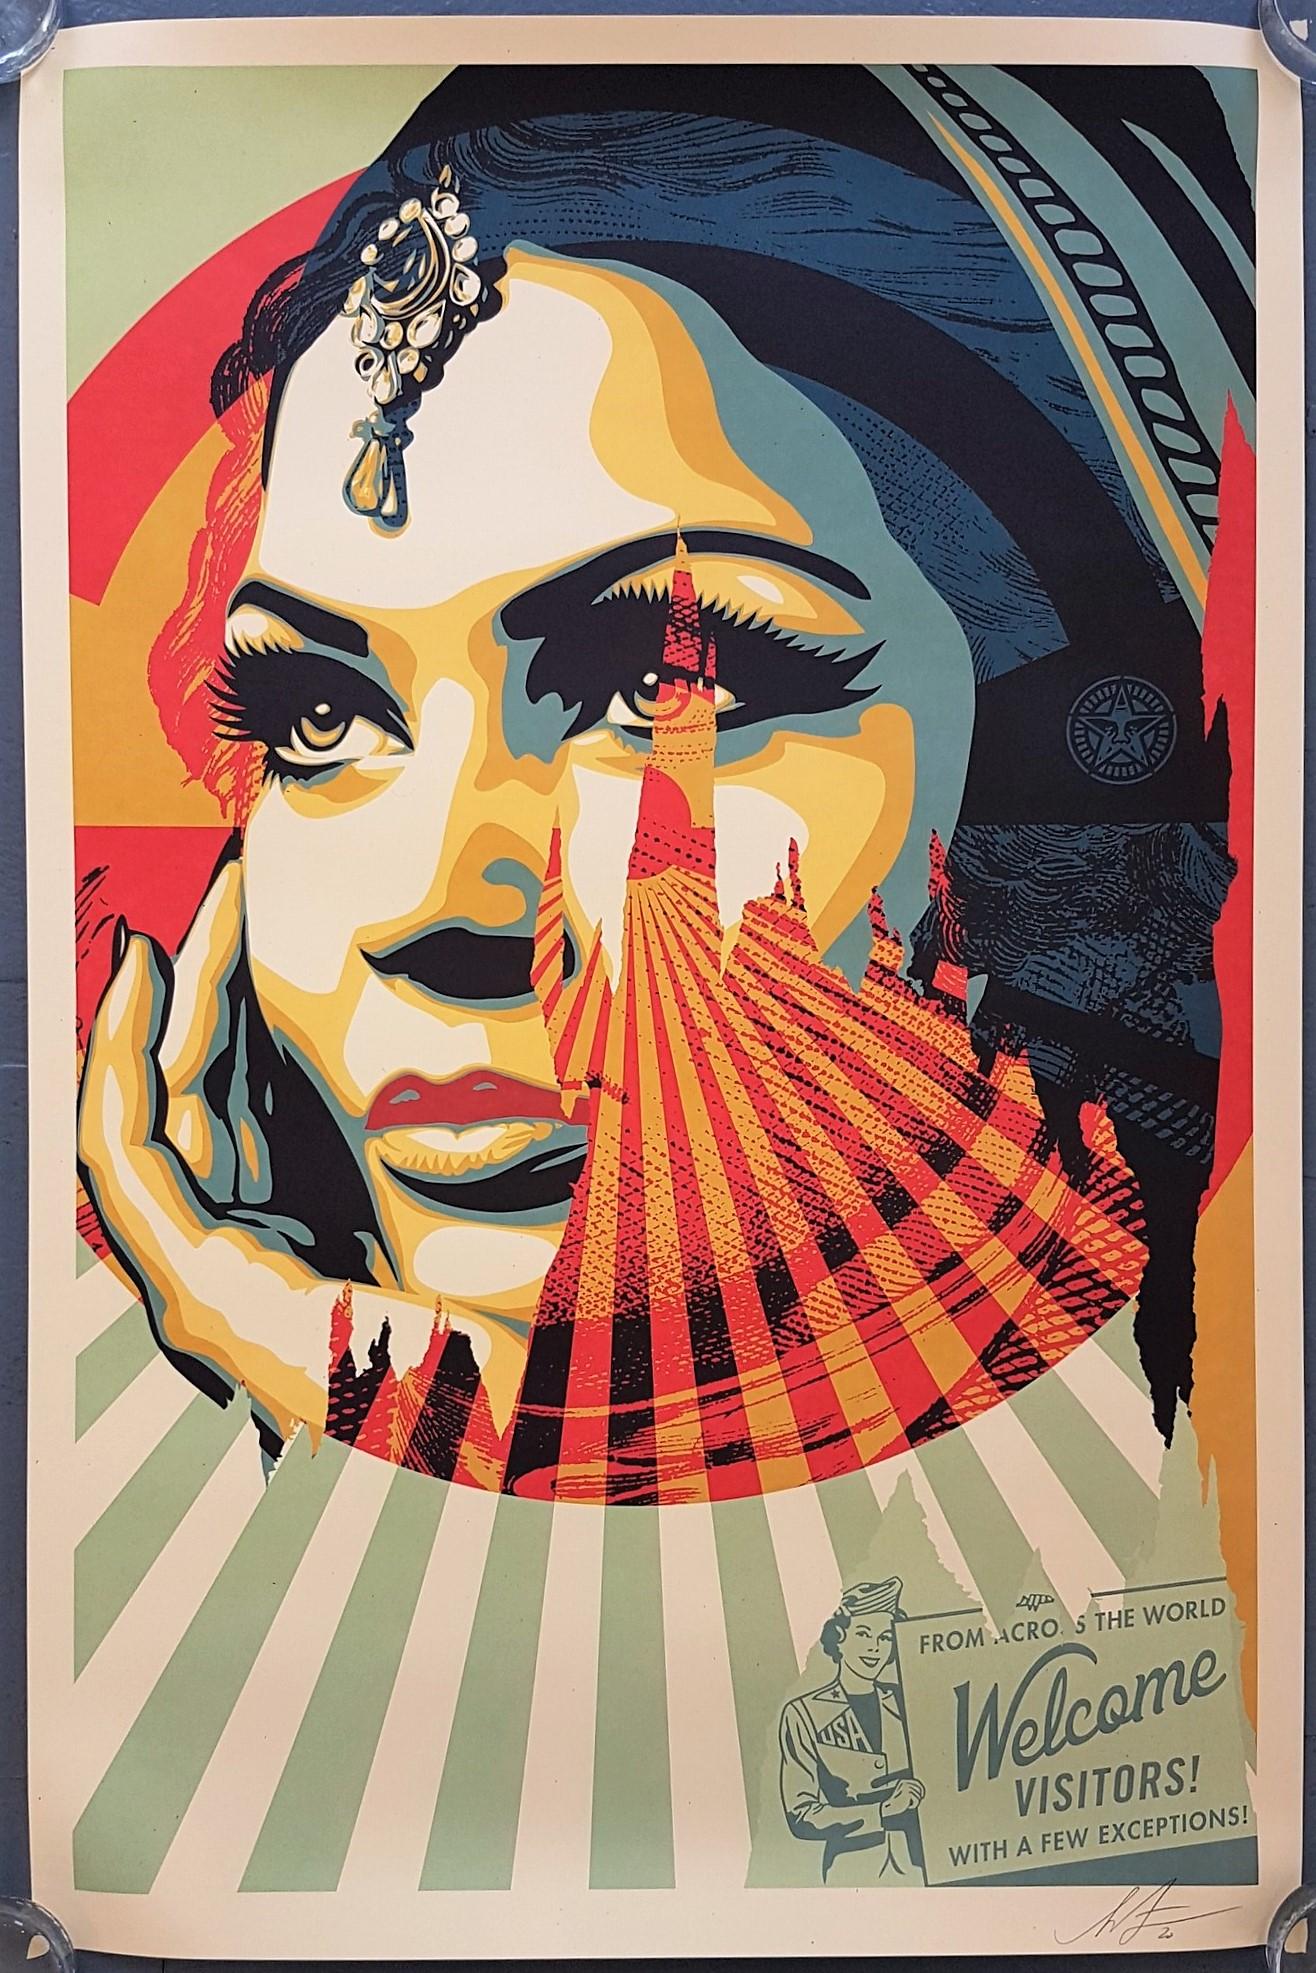 Target Exceptions (Iconic, ~50% OFF LIST PRICE) - Print by Shepard Fairey